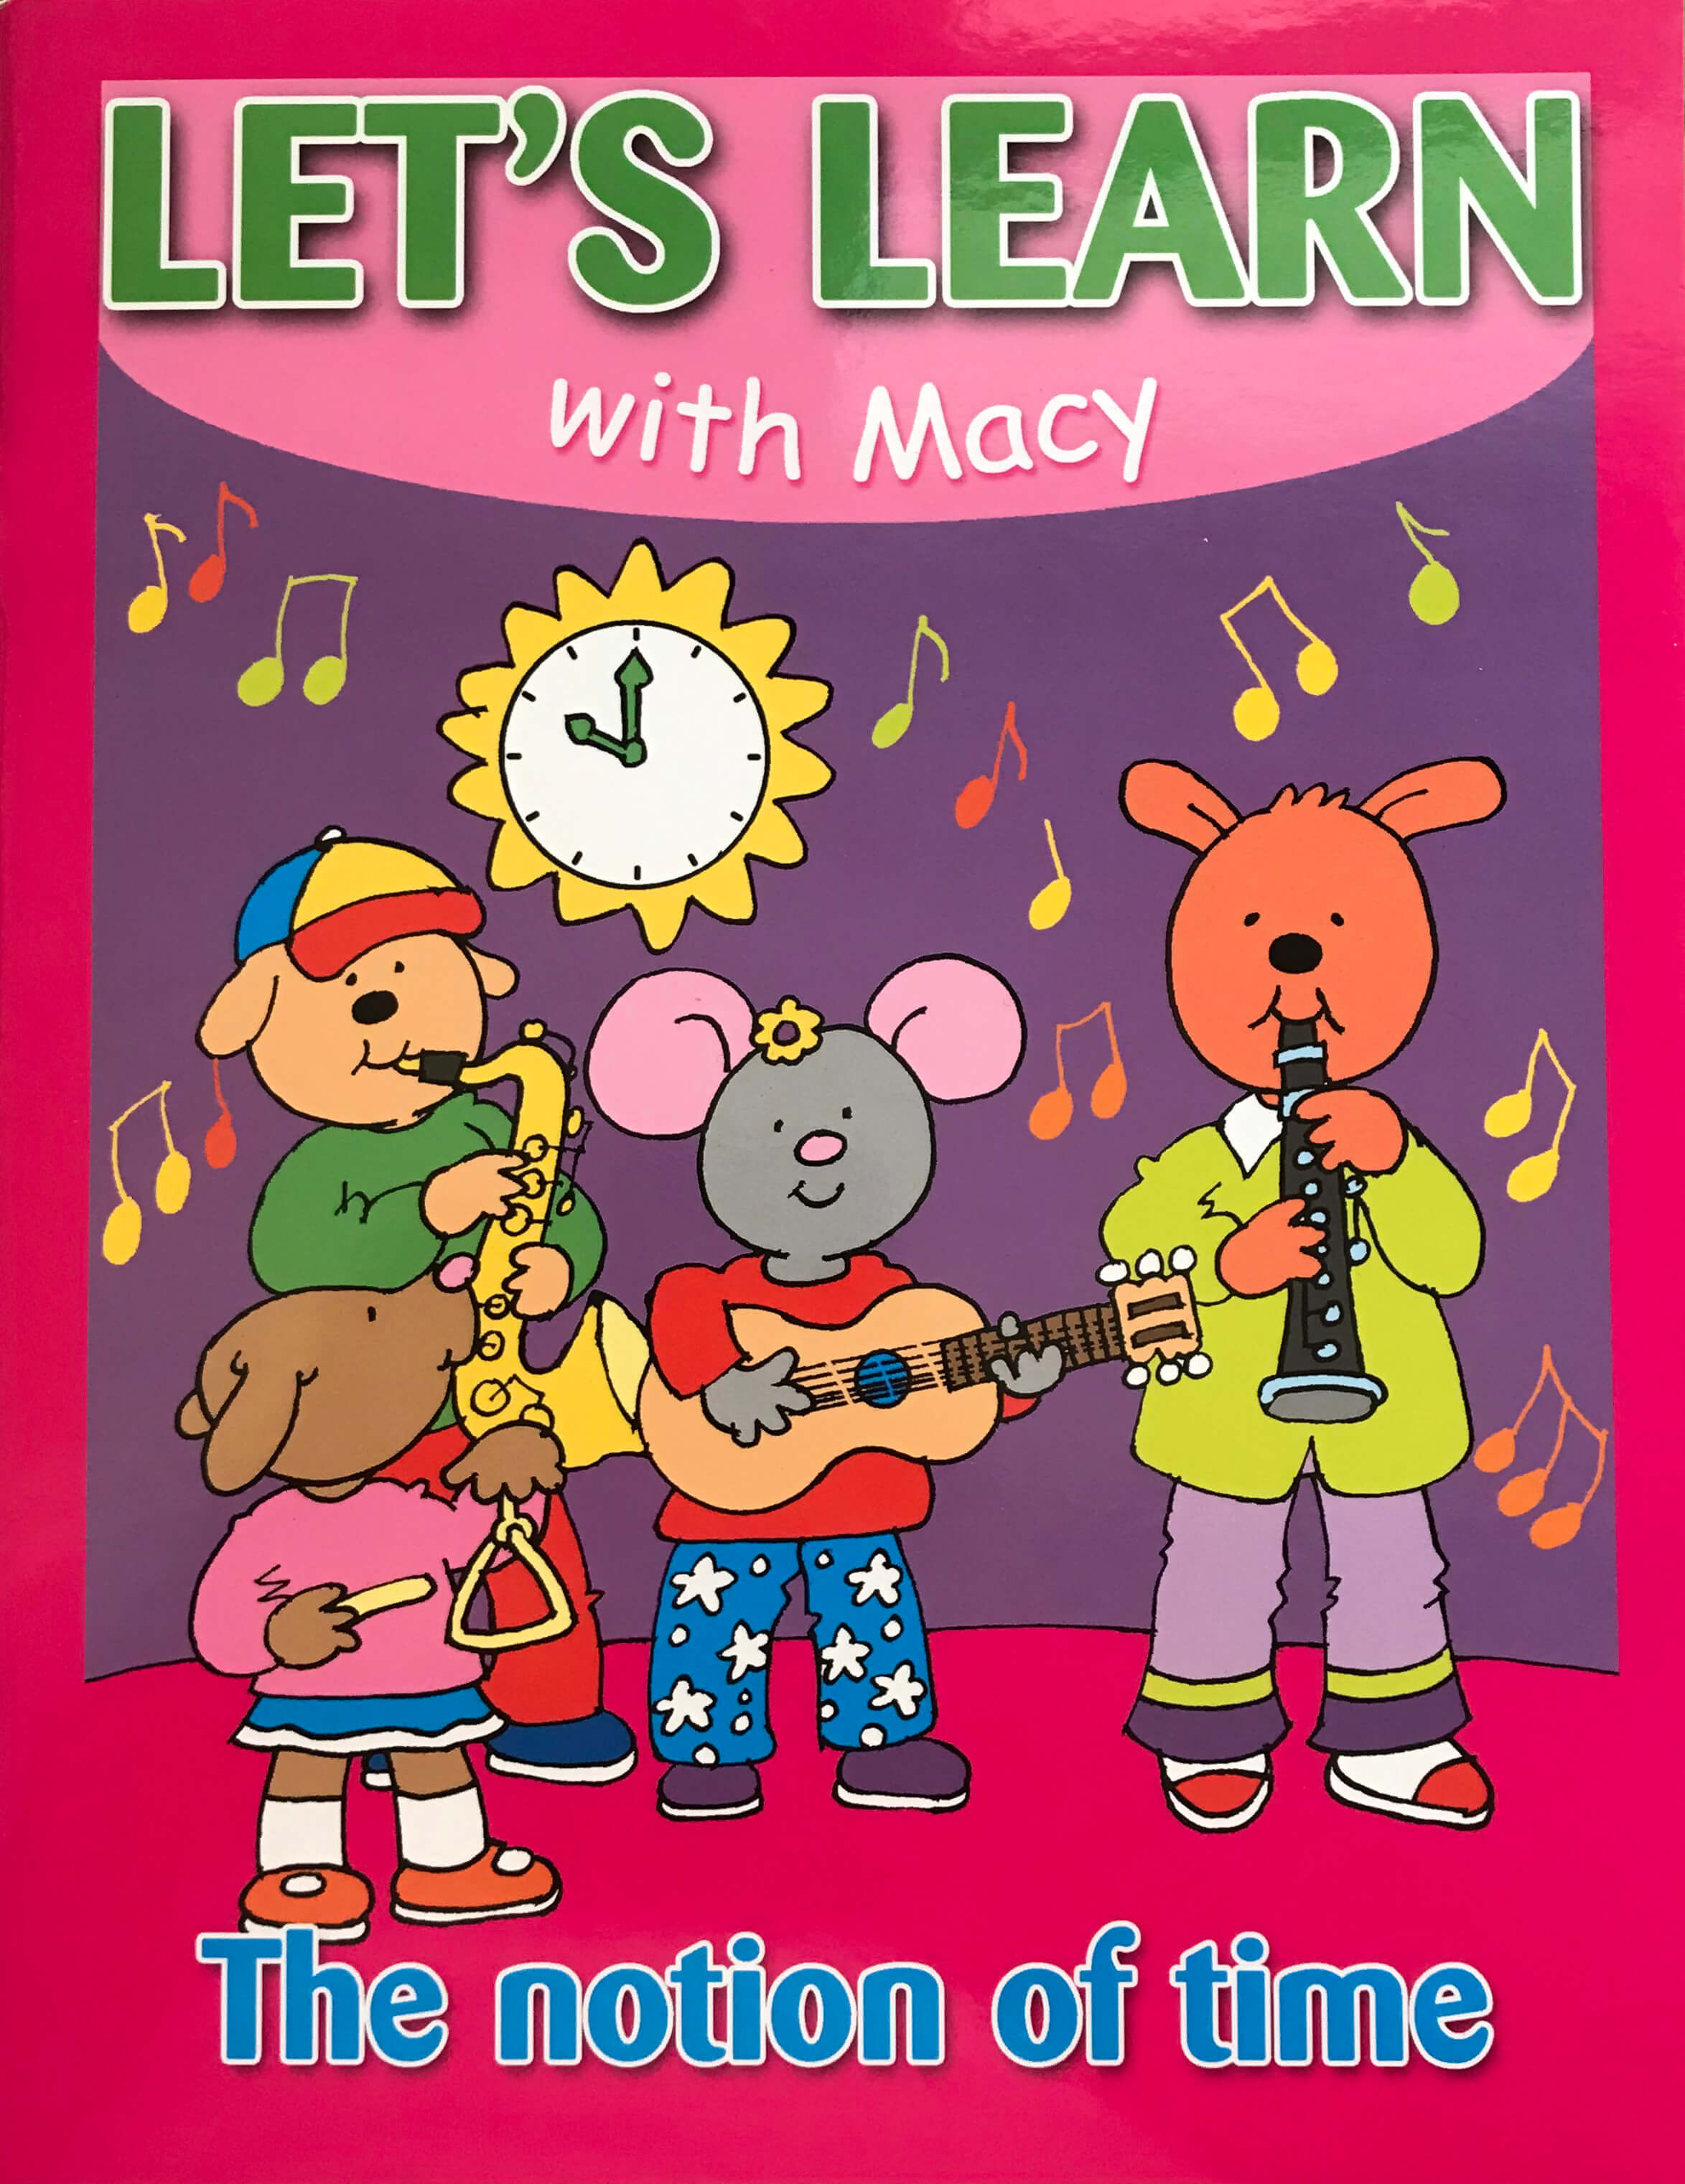 LET'S LEARN with Macy the notion of time